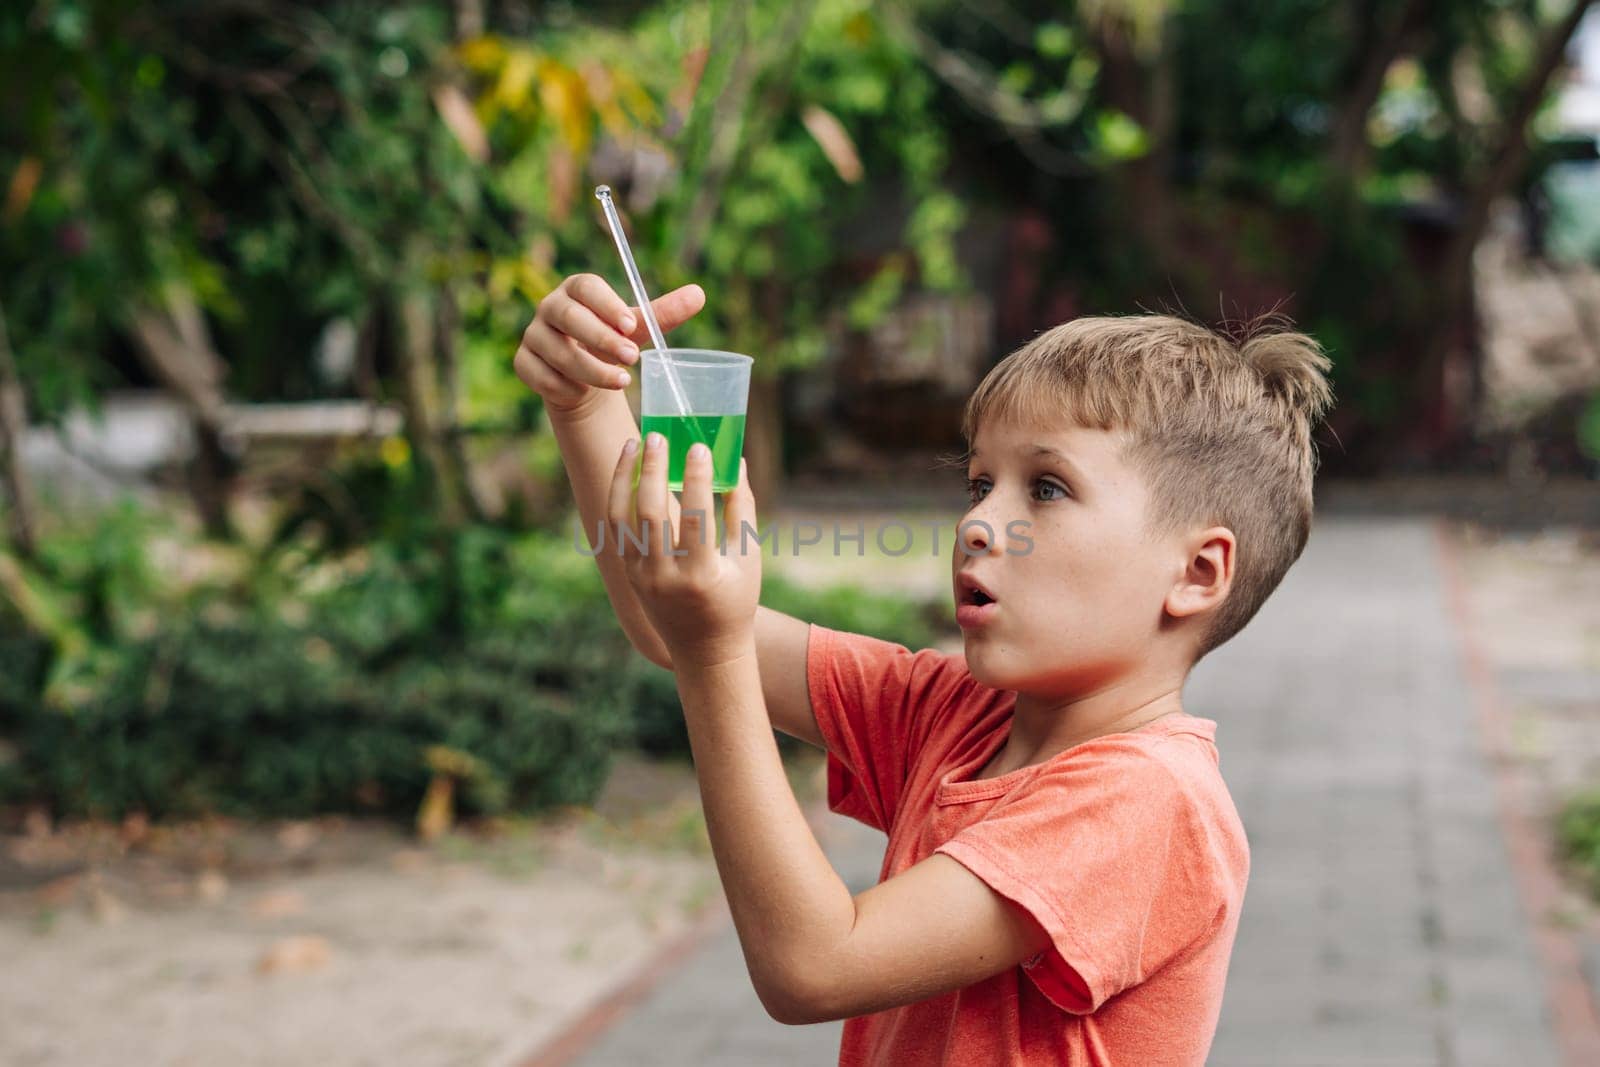 Scientific discovery family education at home. Boy surprise chemical experiments outside nature.